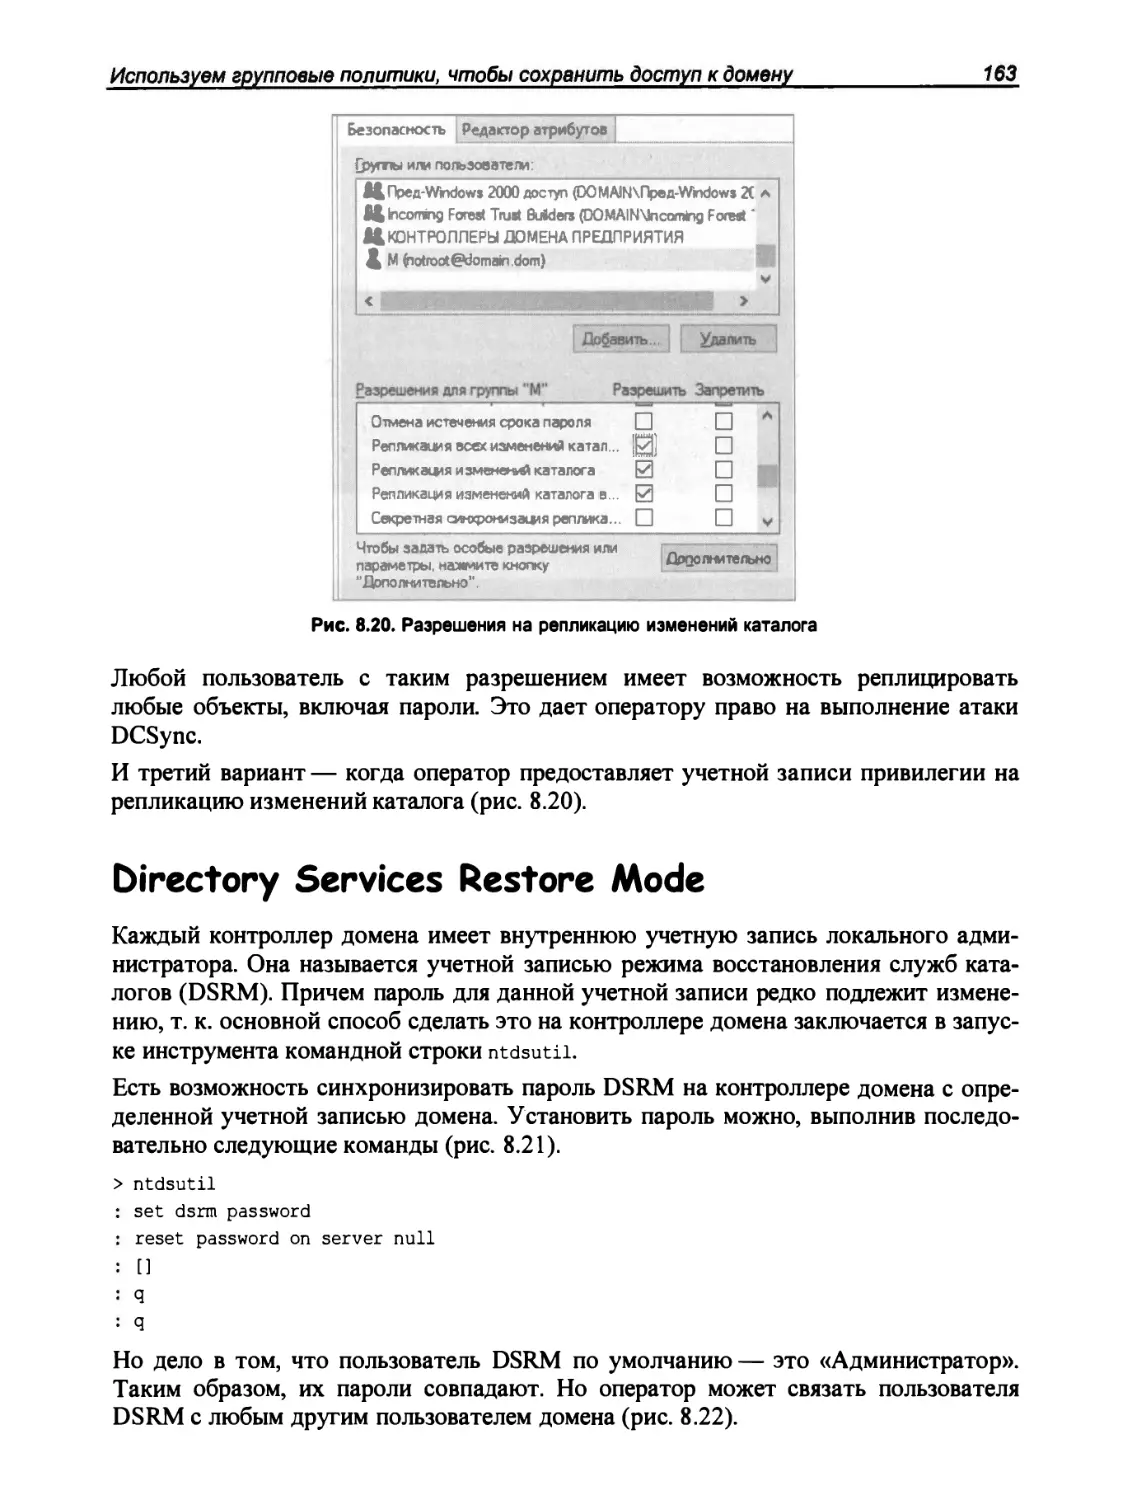 Directory Services Restore Mode